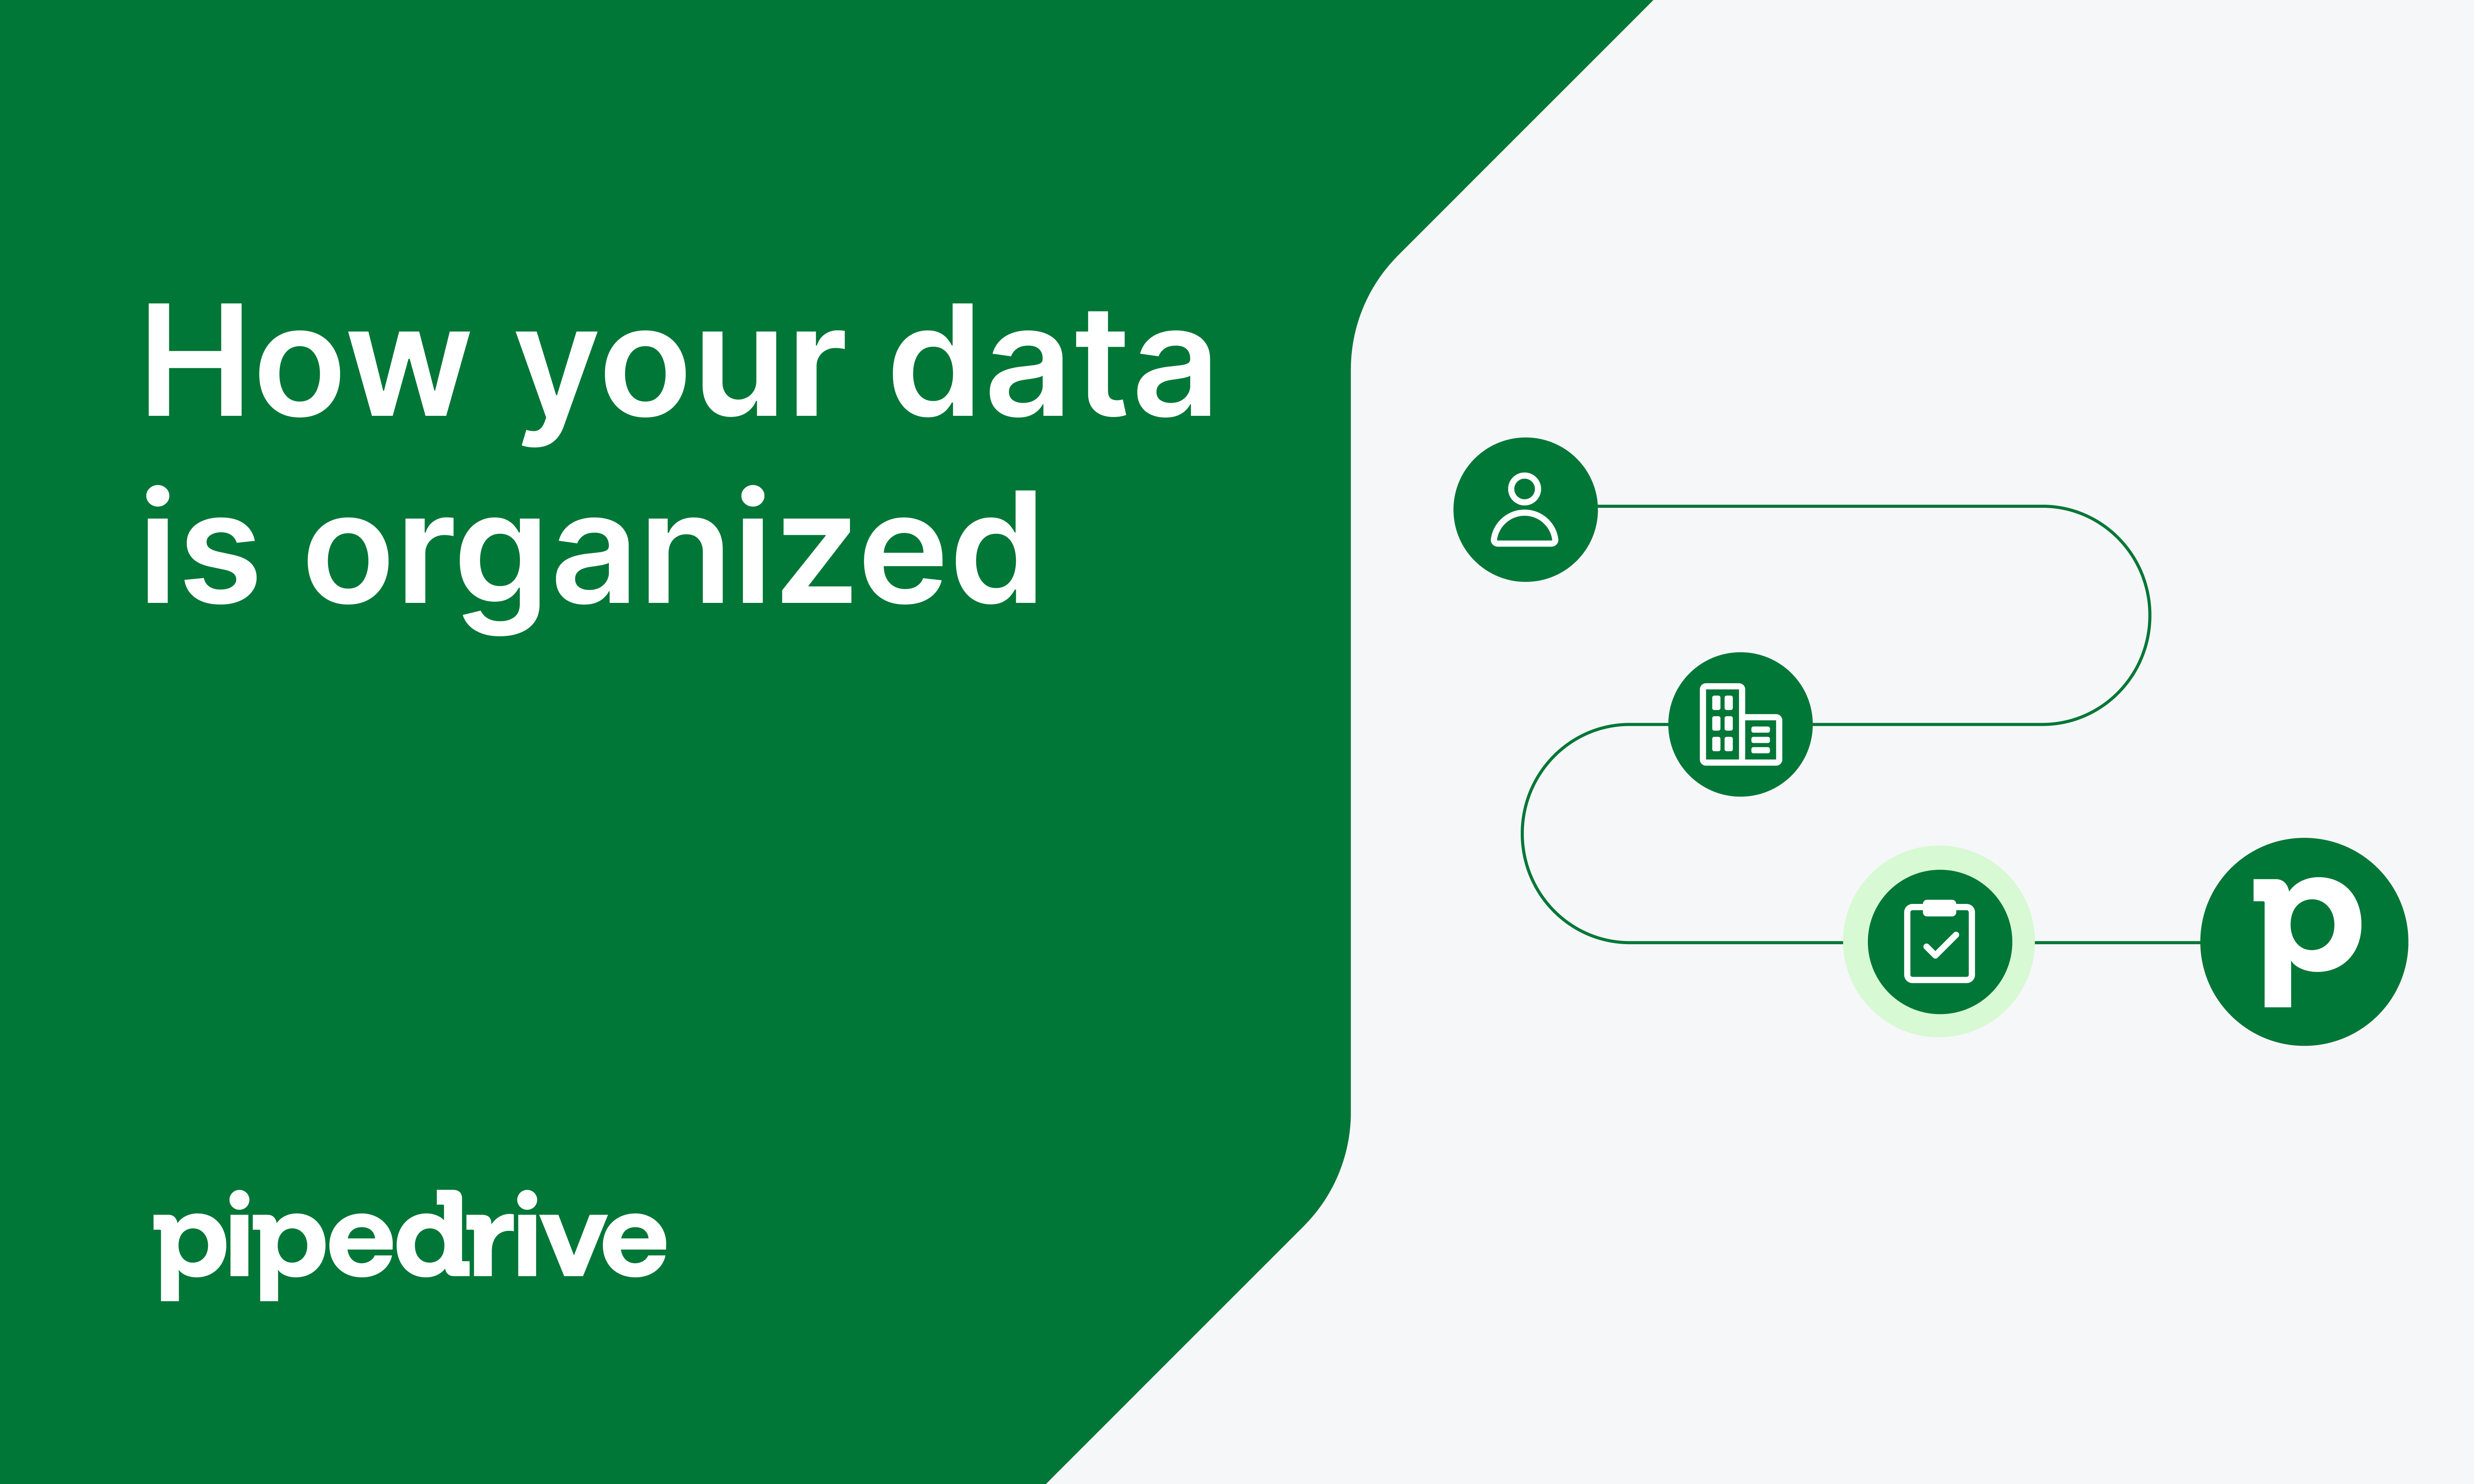 How your data is organized